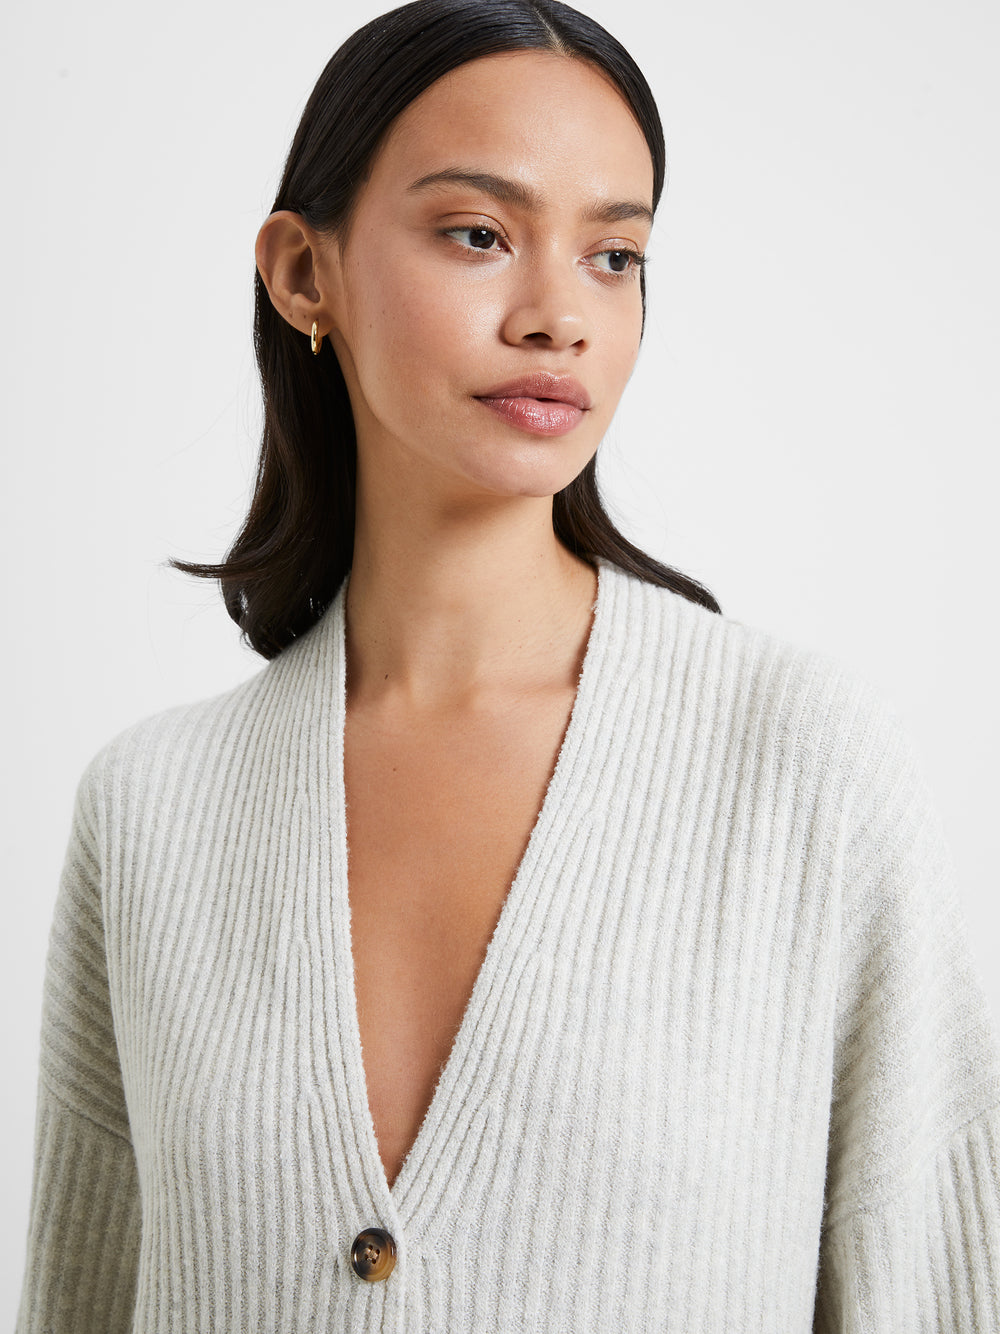 Dress Oatmeal US Light | Button Mel Connection Down Ribbed Vhari Sweater French